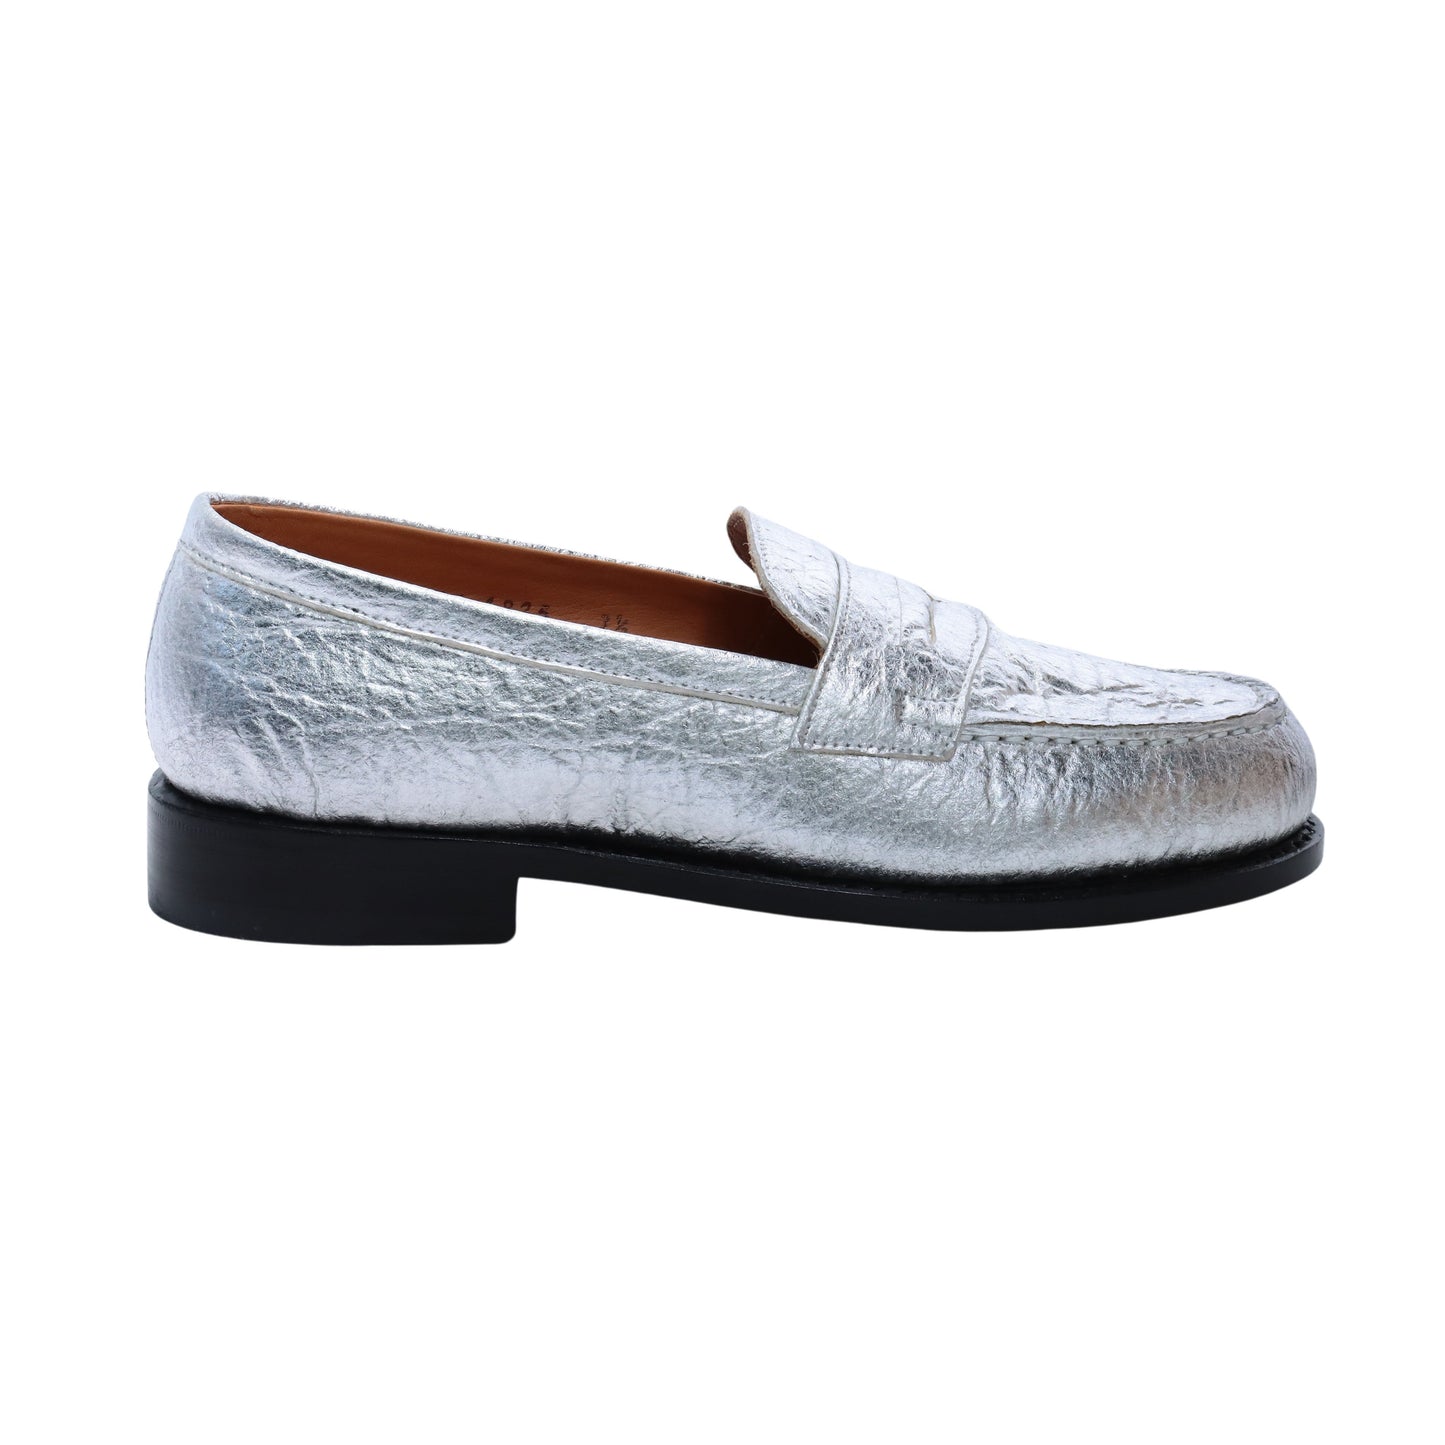 99036 / PINATEX / SILVER / LEATHER SOLE / UK3.5(22.5cm)